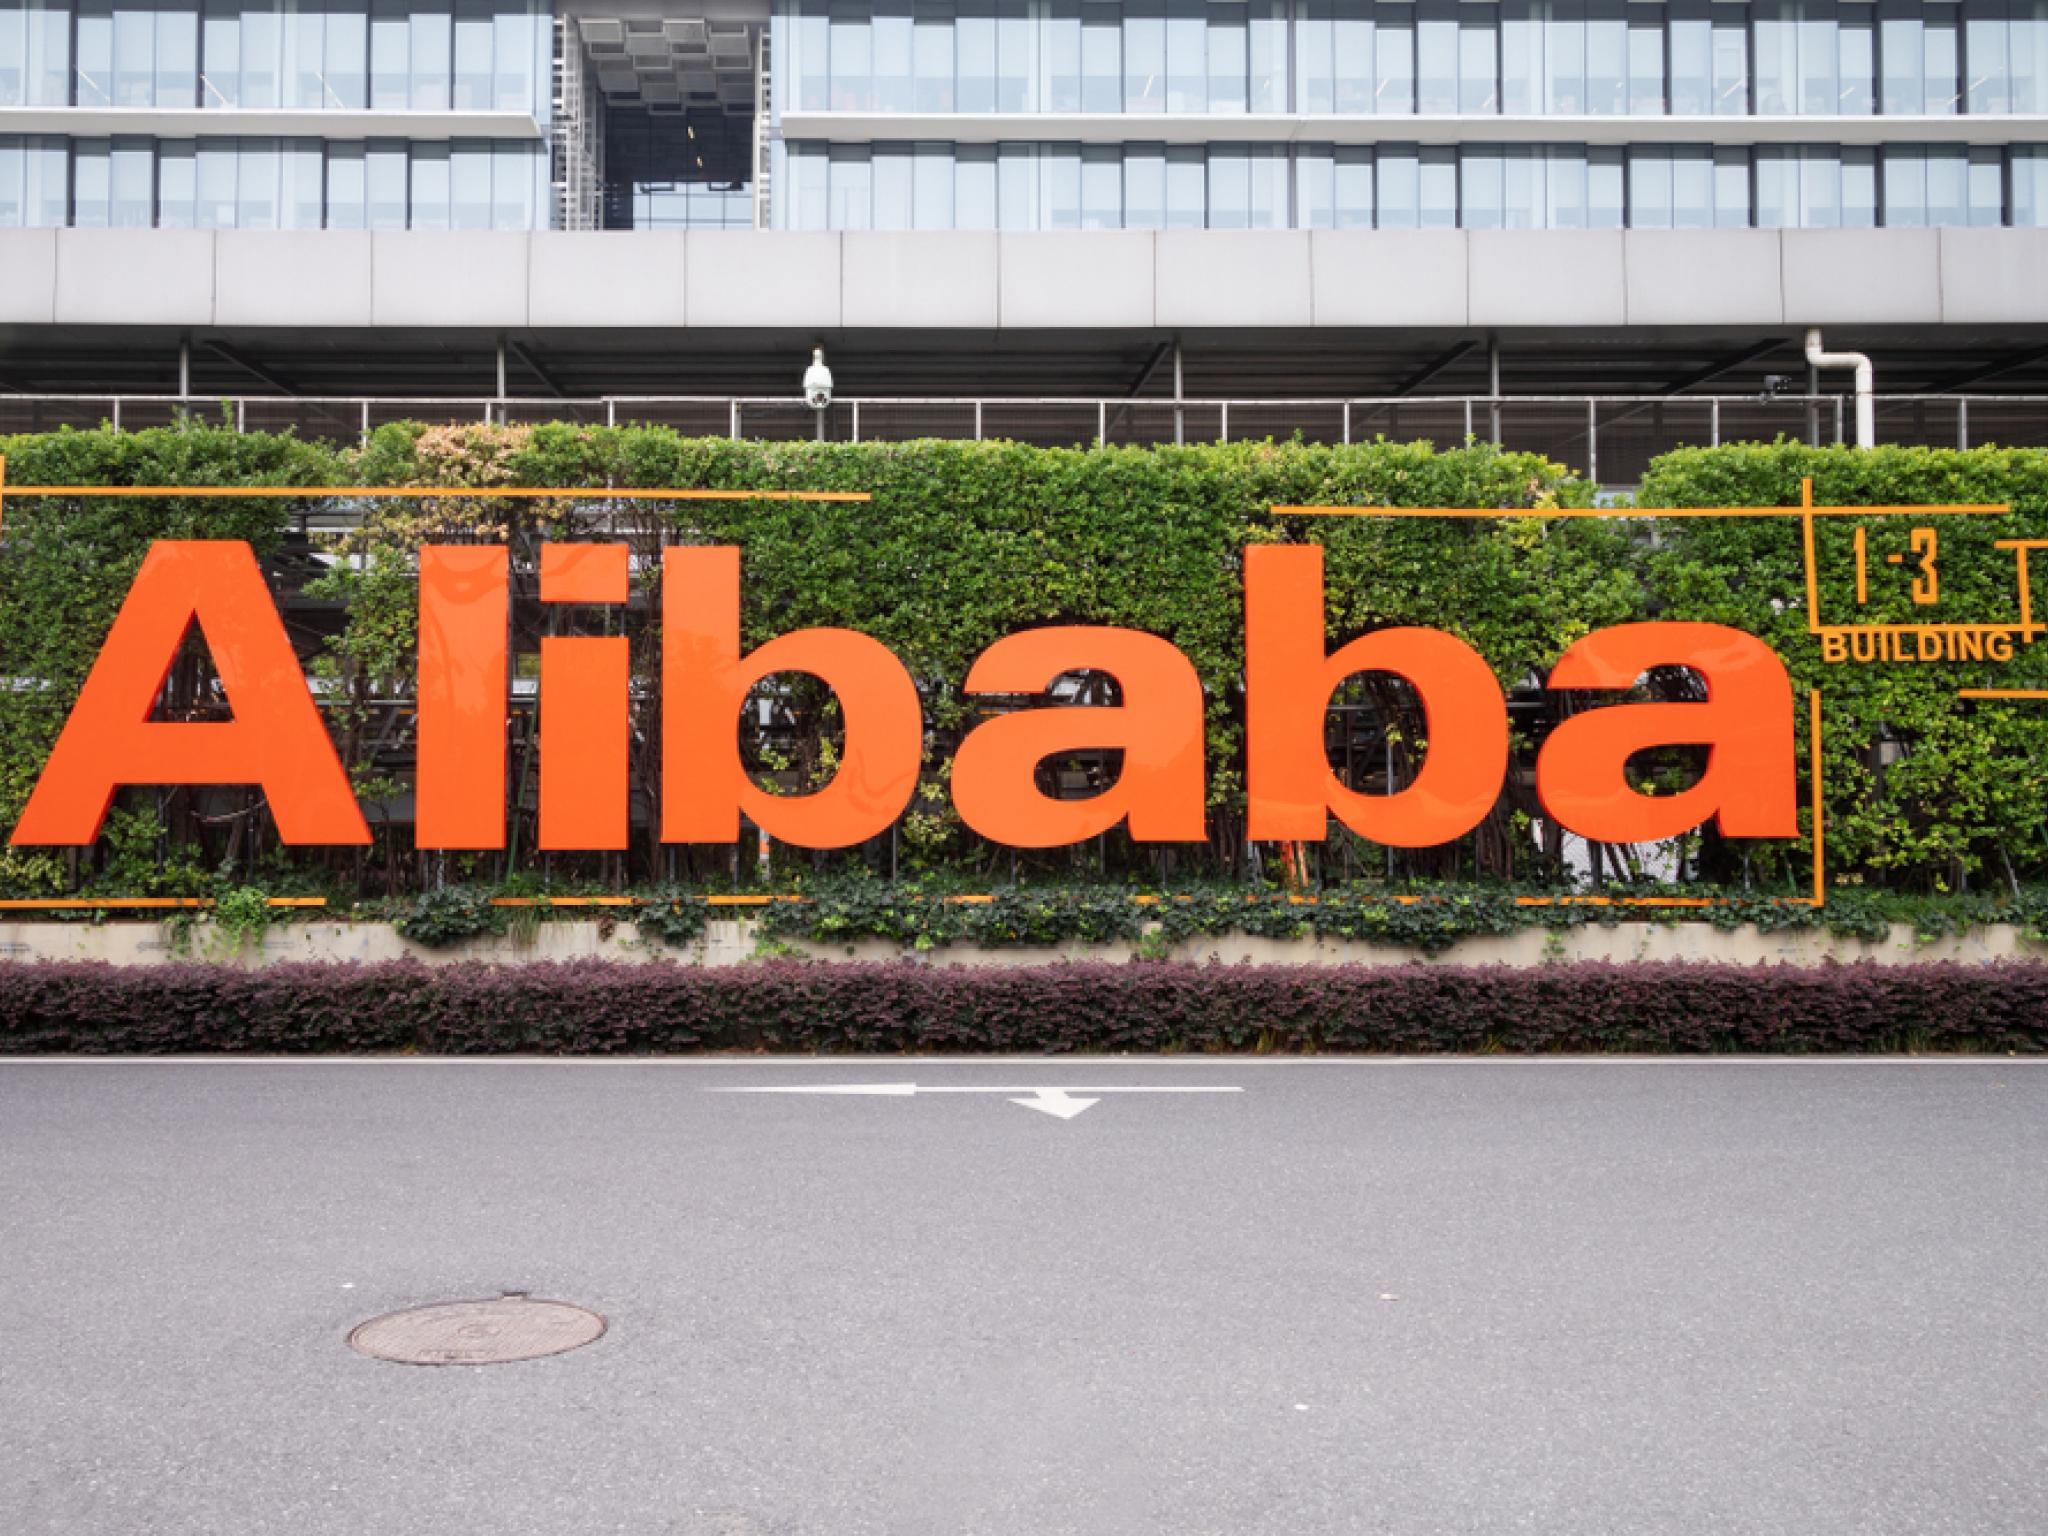  alibaba-shares-bounce-back-thursday-whats-going-on 